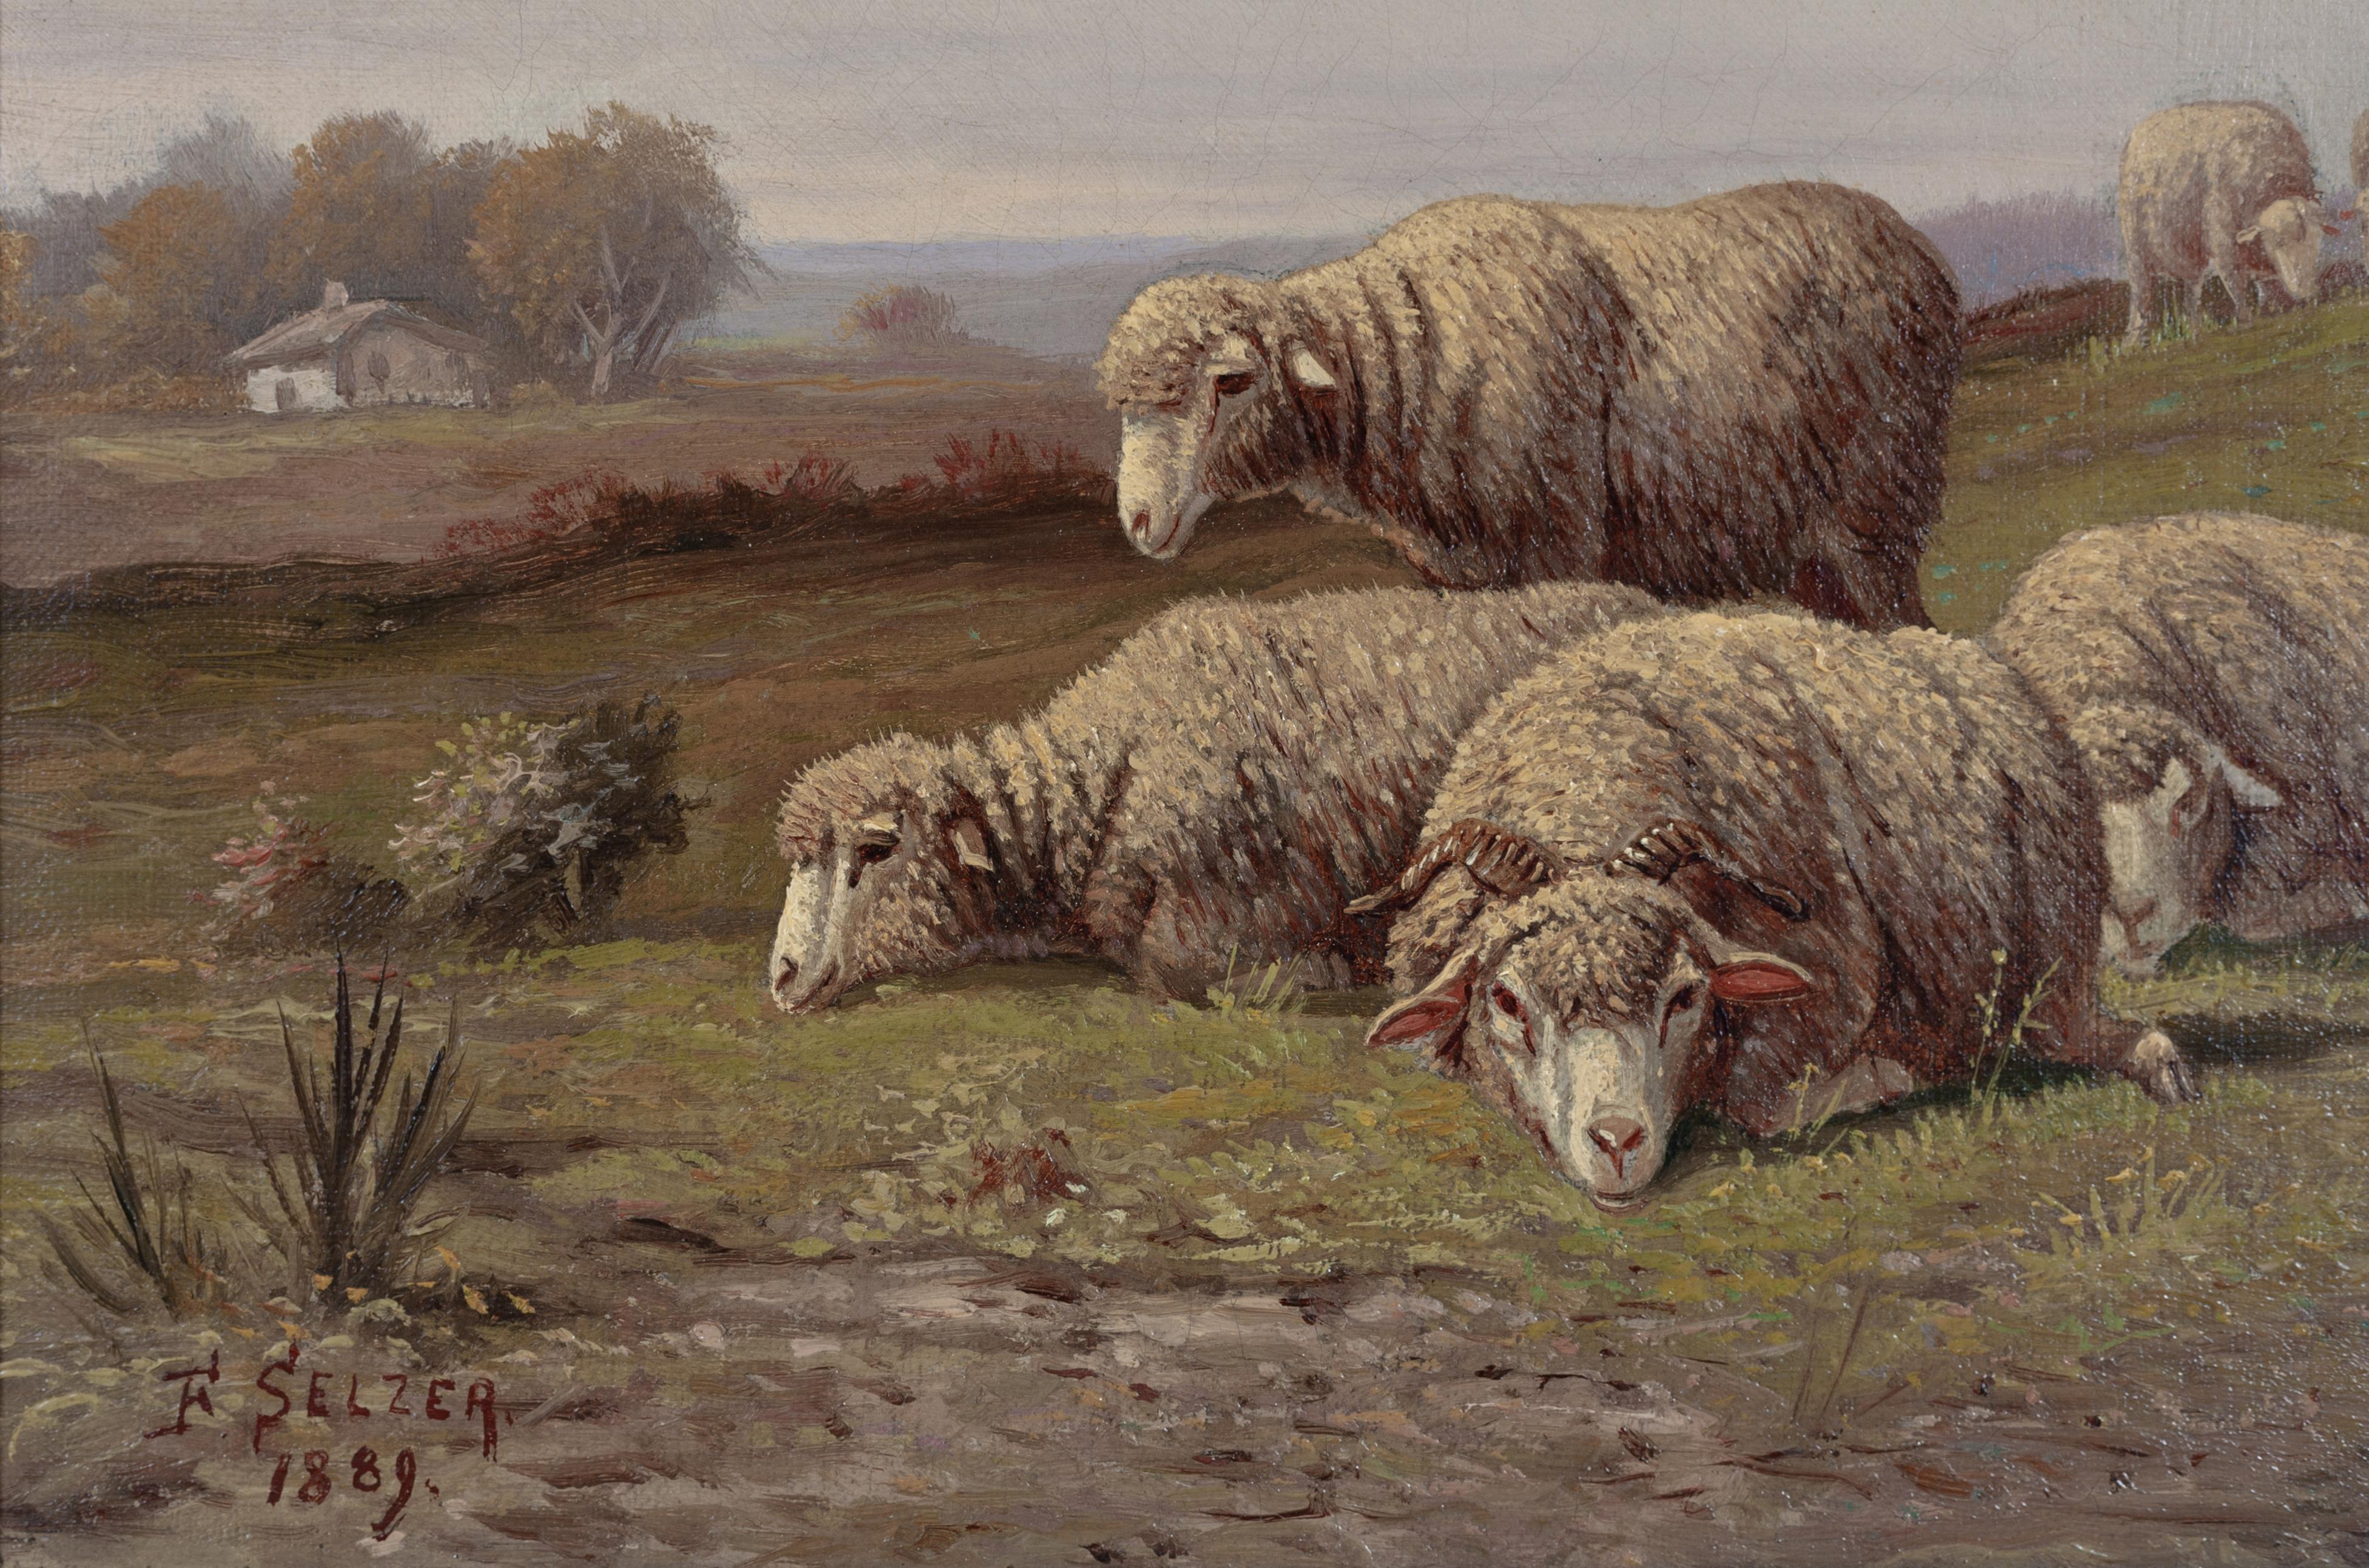 Sheep in Pasture - Painting by Frank Selzer